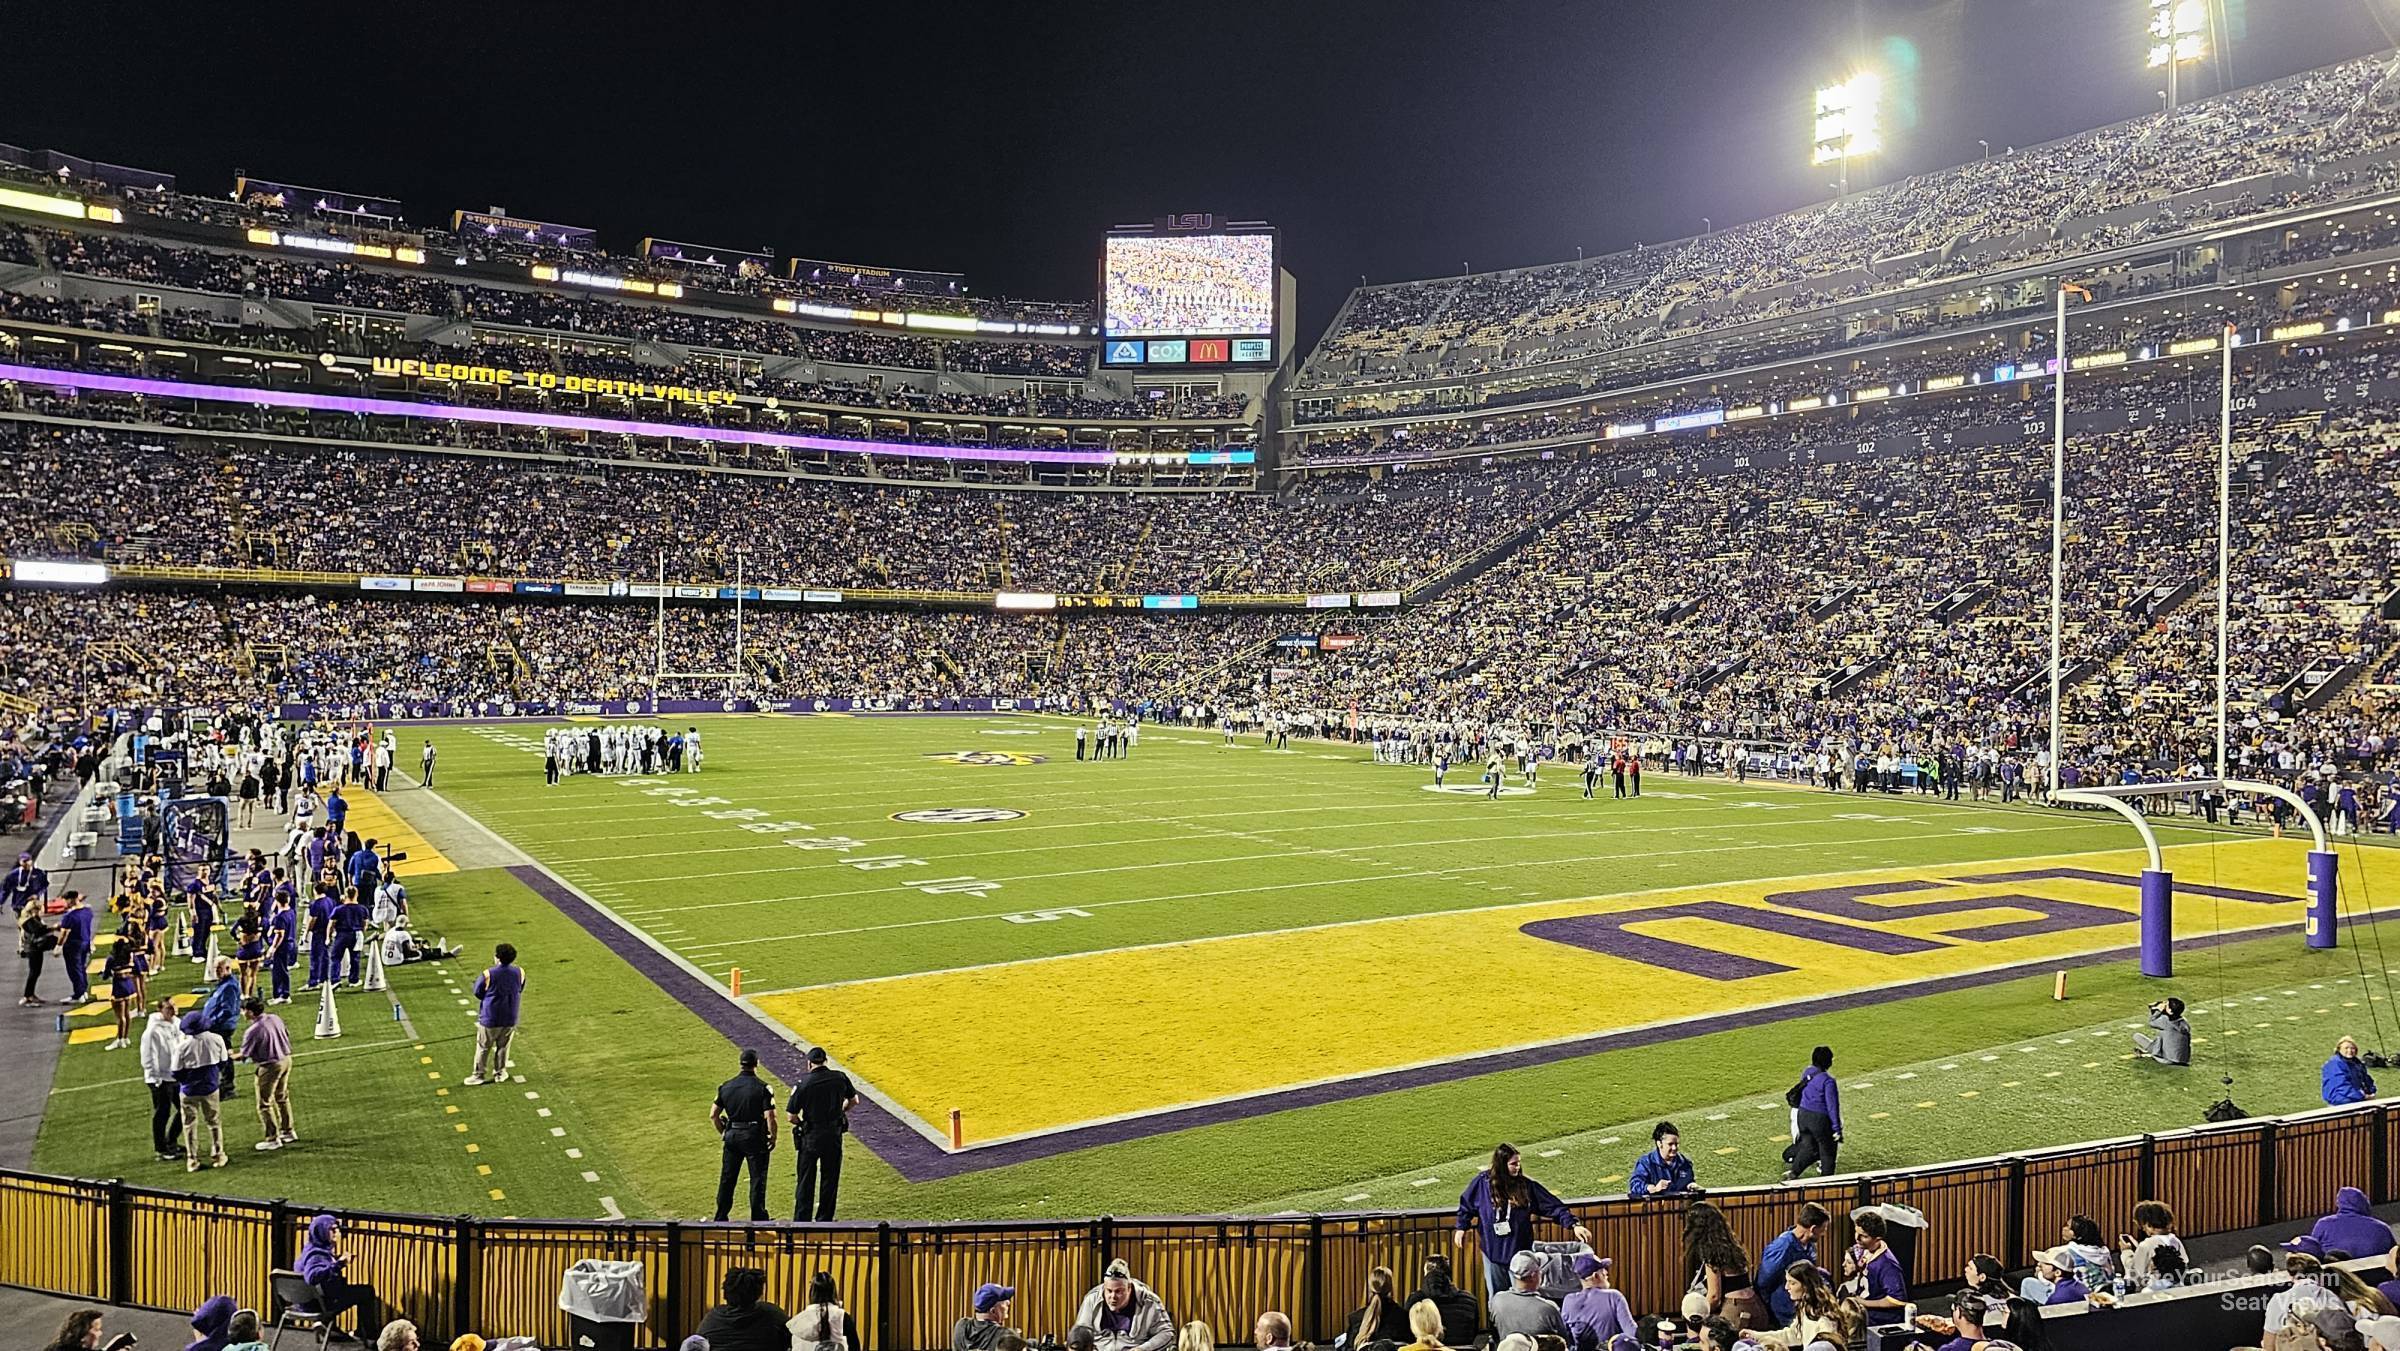 section 208, row 13 seat view  - tiger stadium